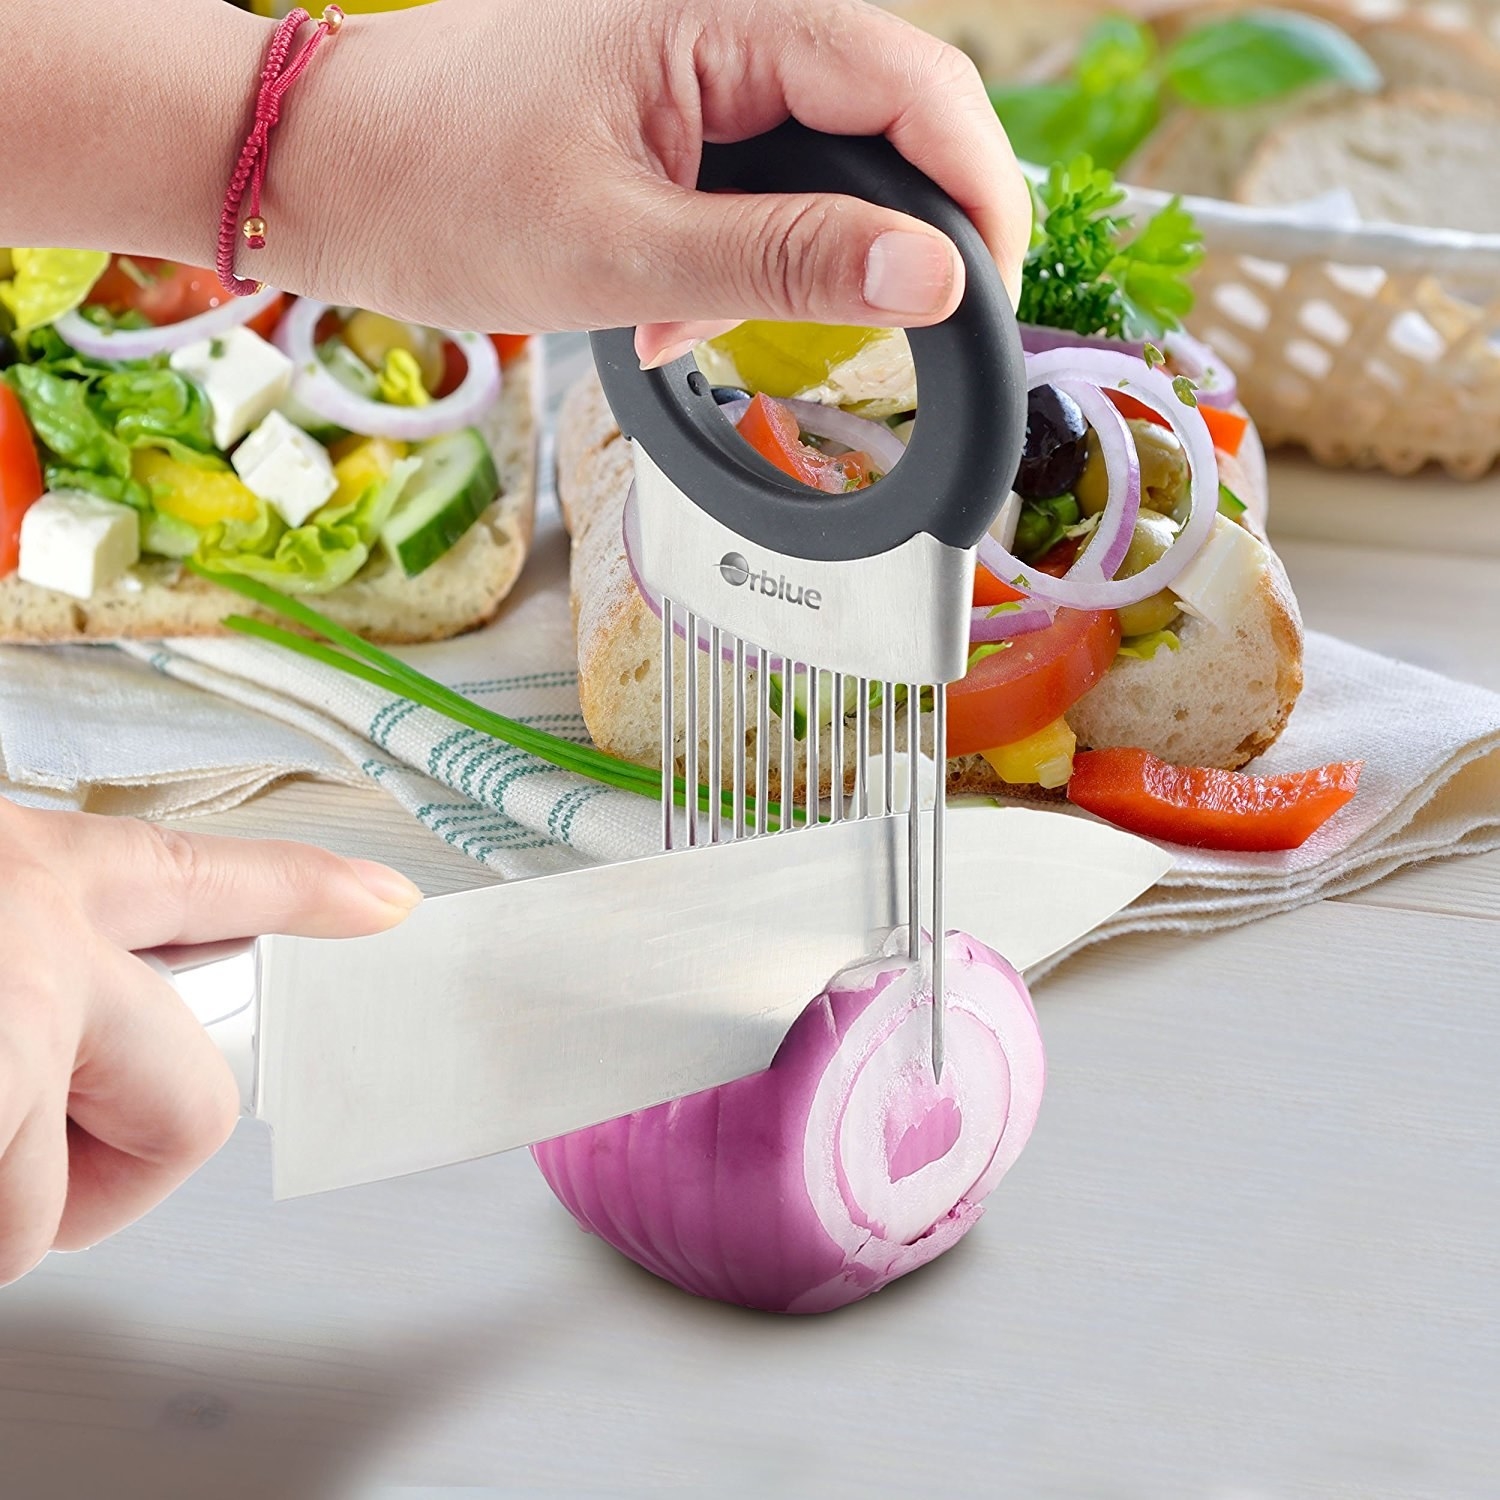 Quirky Cooking: 15 Kitchen Accessories That Are Just Plain Fun